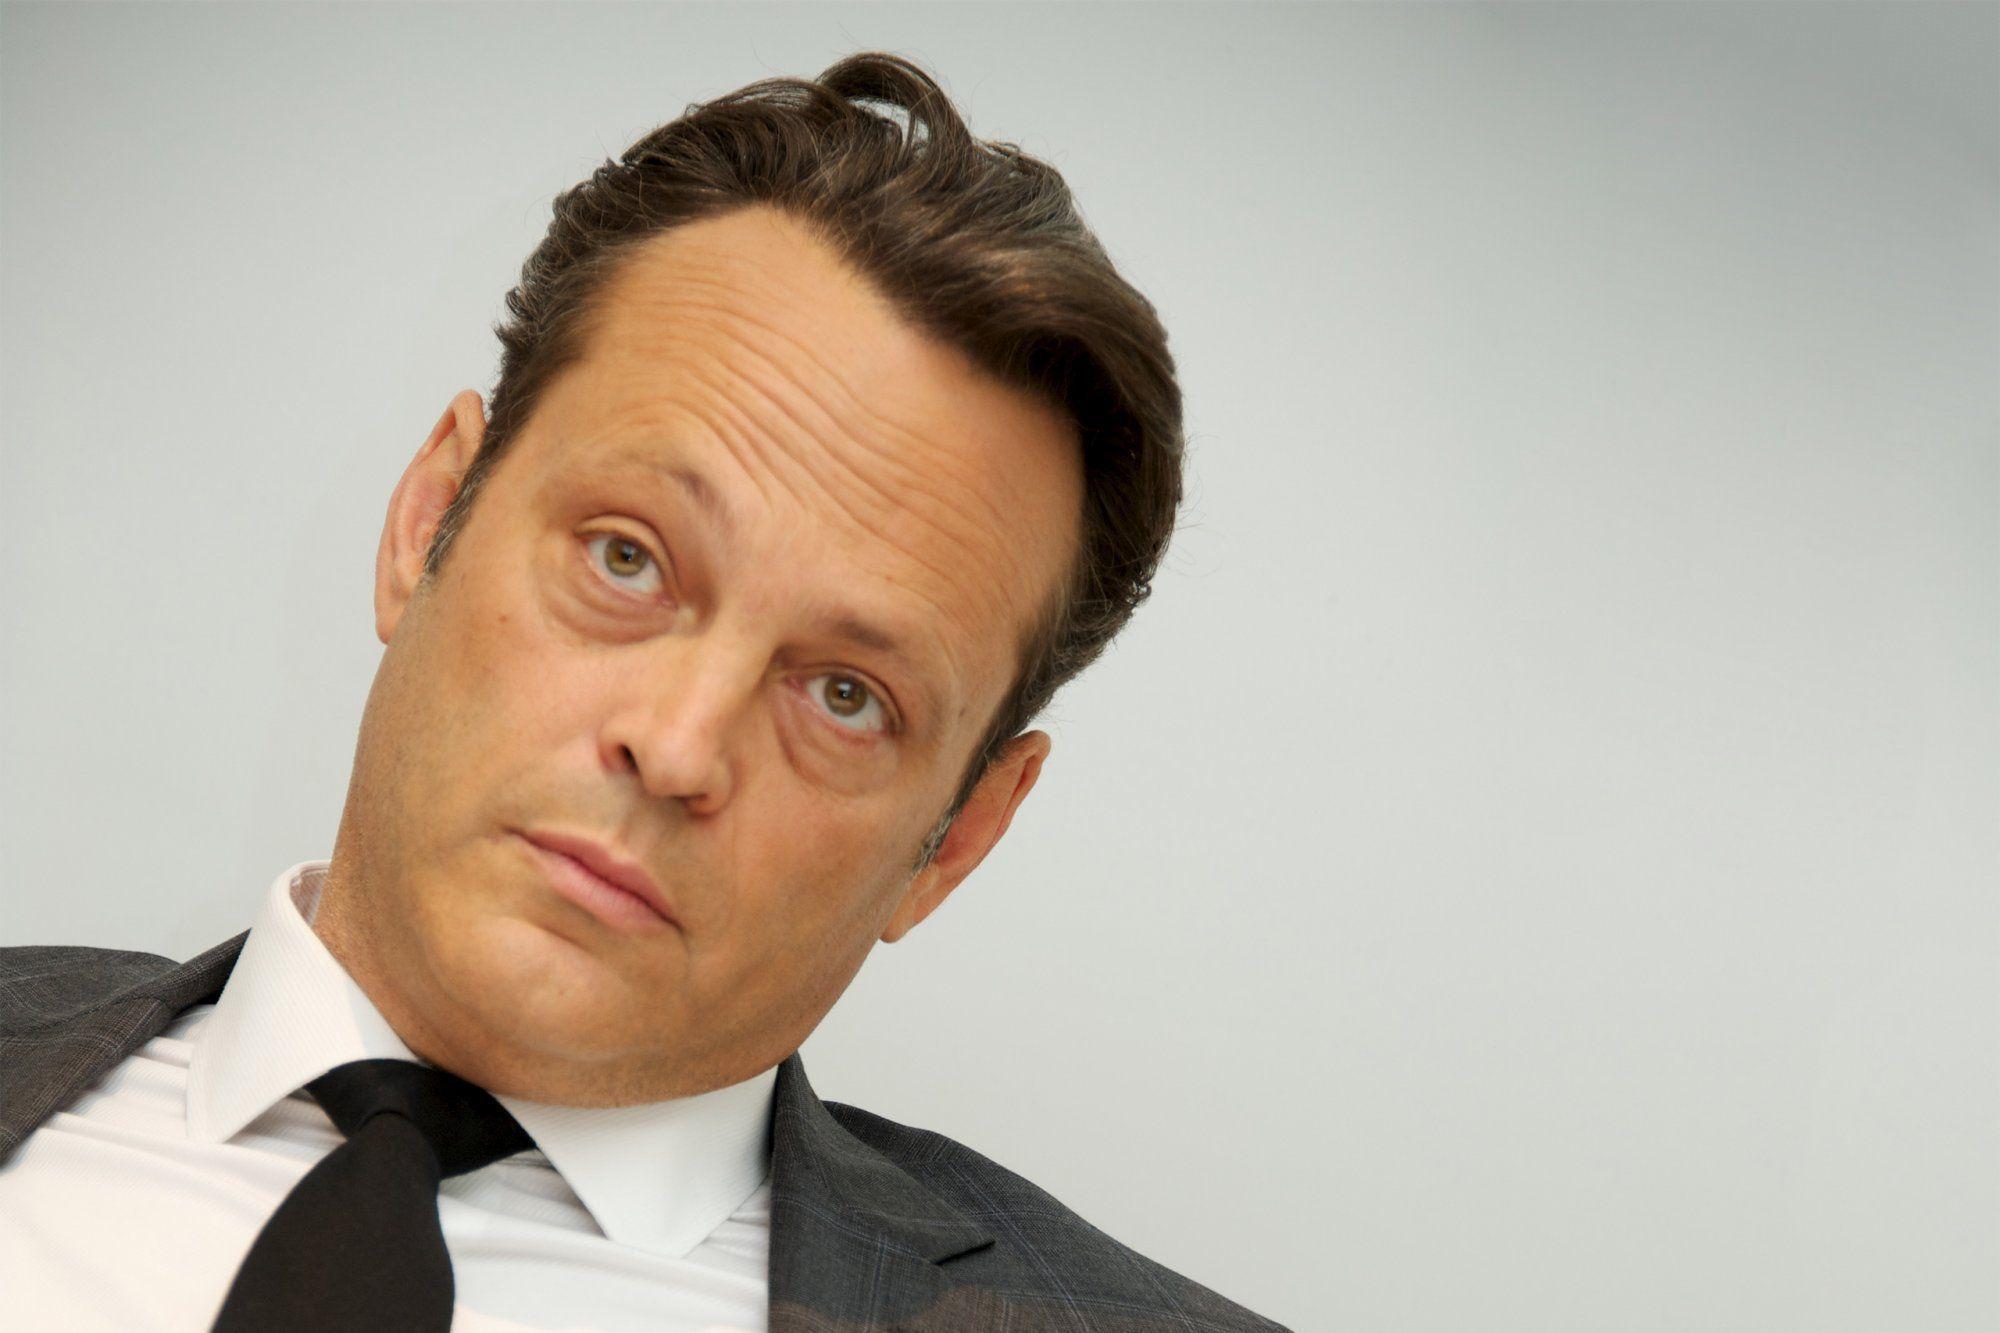 Vince Vaughn Wallpaper Image Photo Picture Background